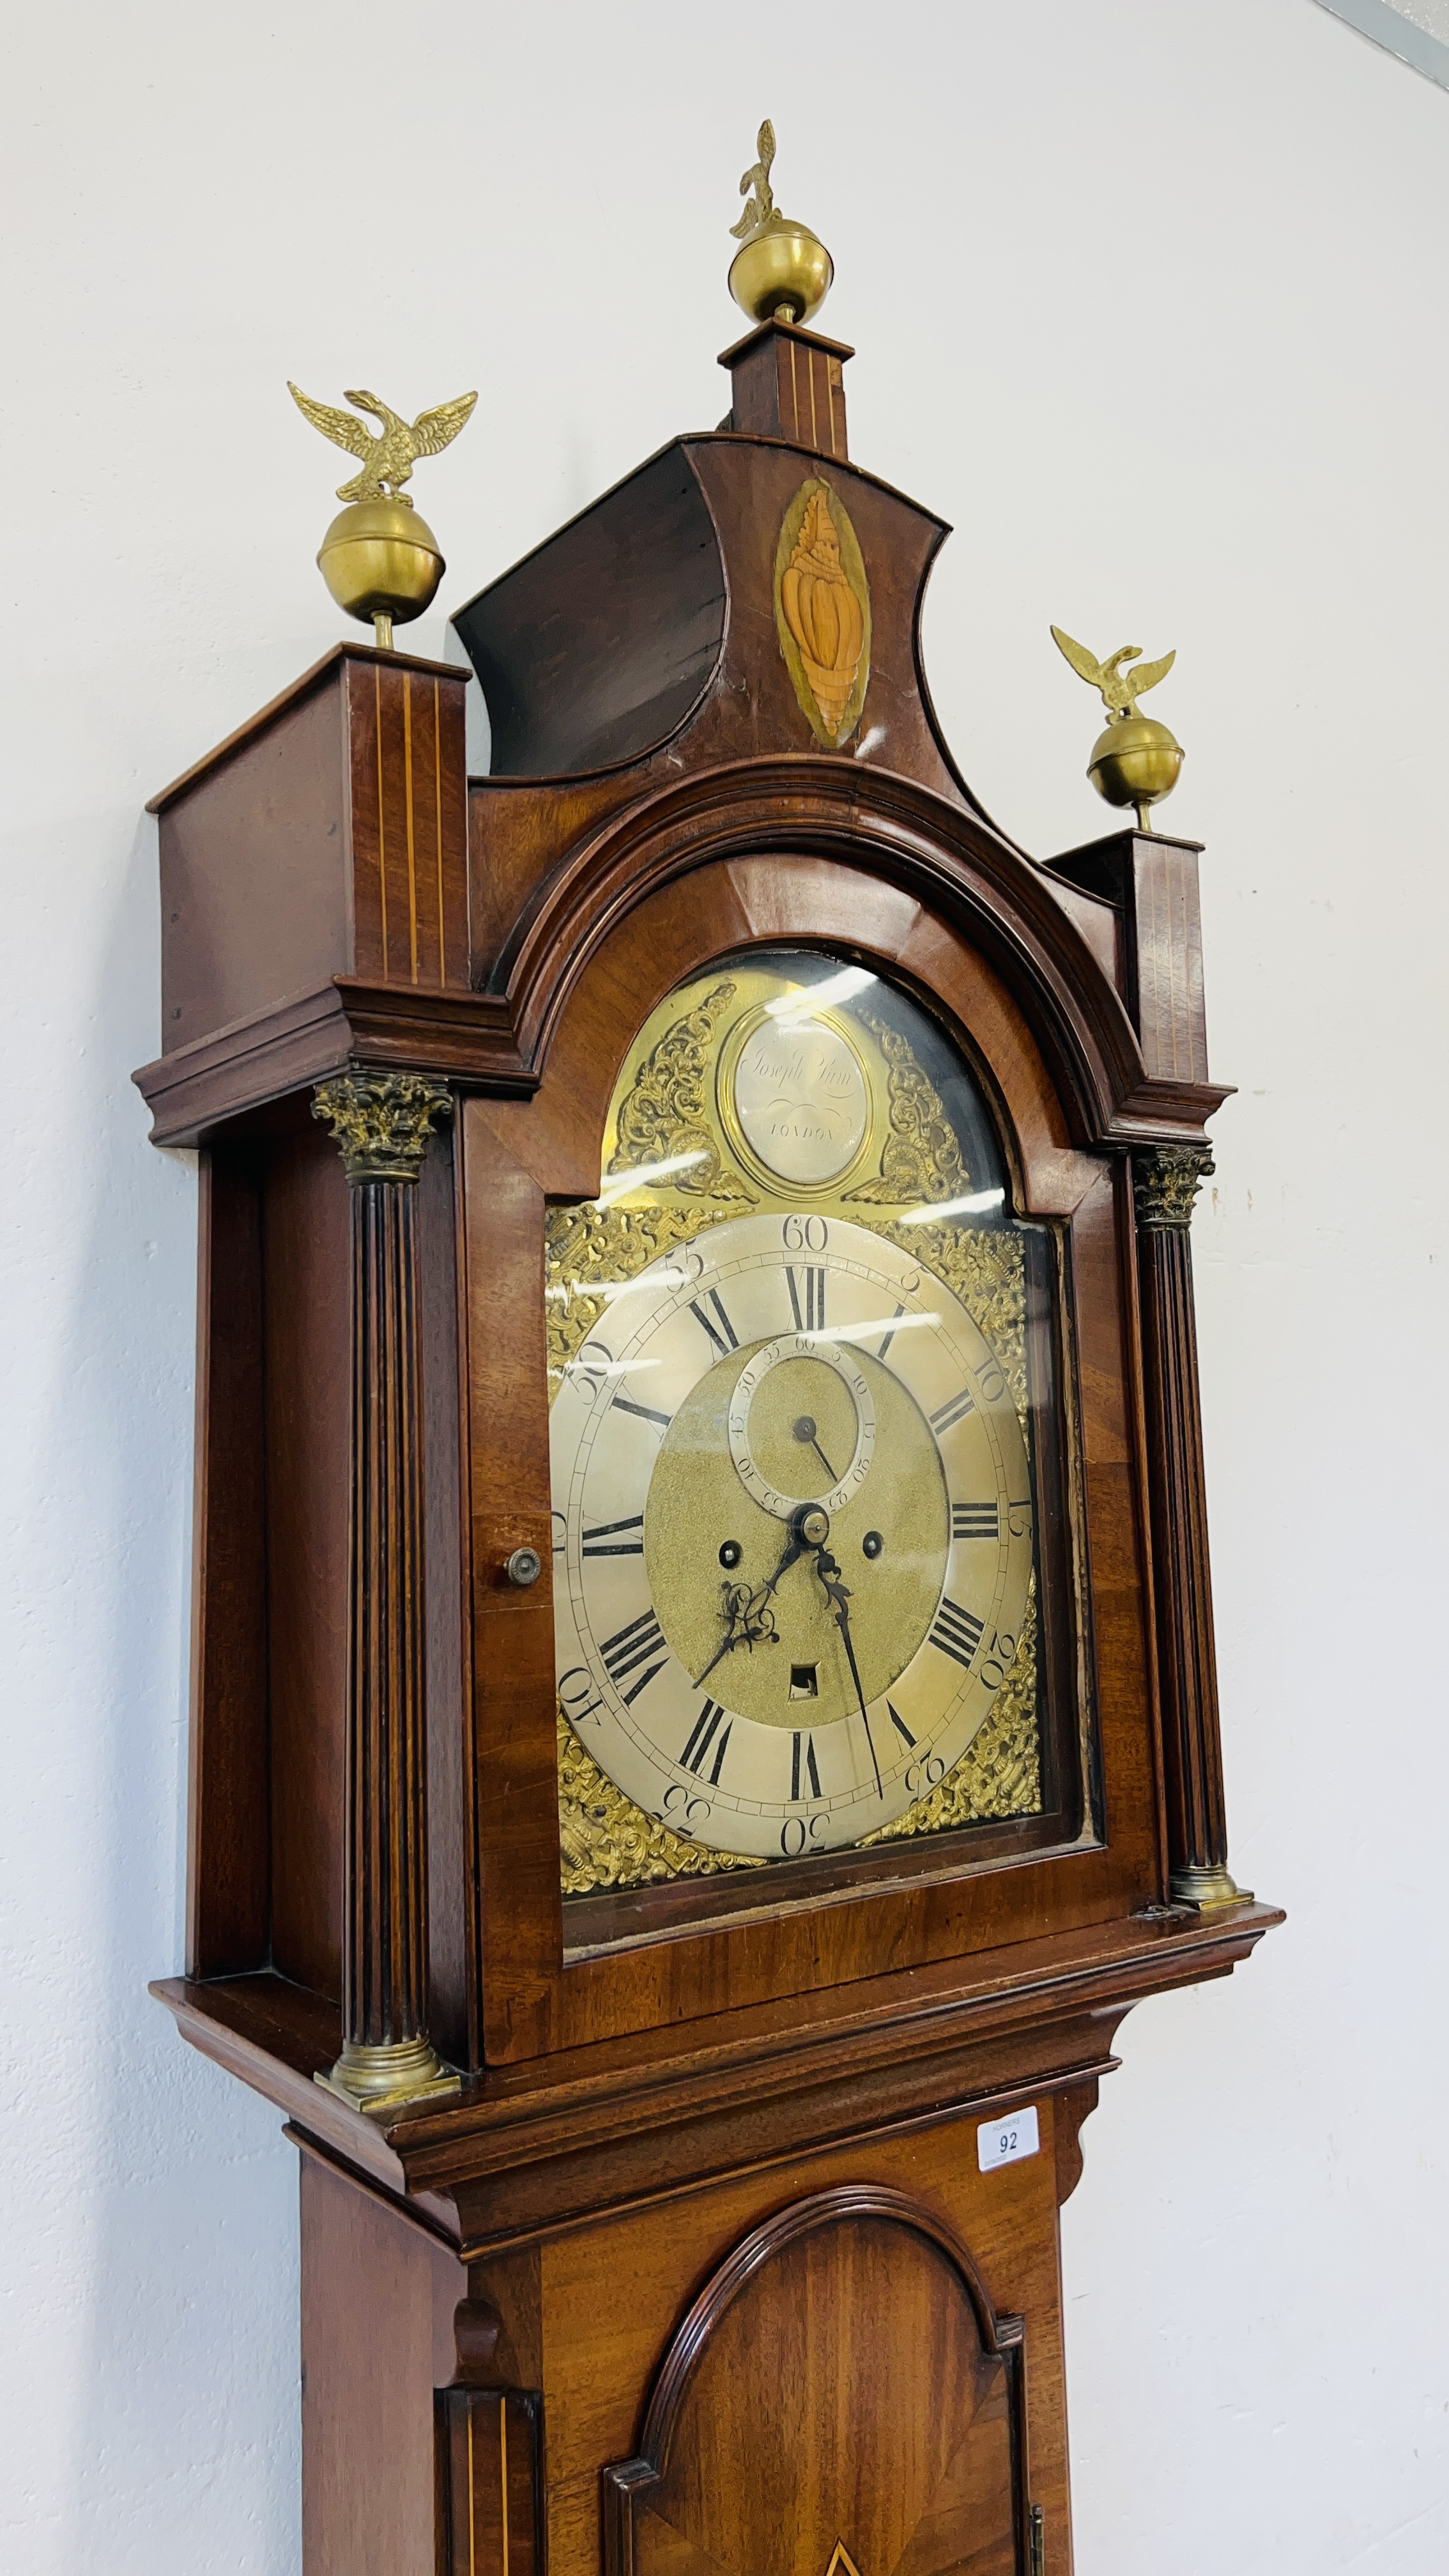 AN INLAID MAHOGANY GRANDFATHER CLOCK WITH JOSEPH LUM FACE COMPLETE WITH KEY AND PENDULUM - Image 2 of 14